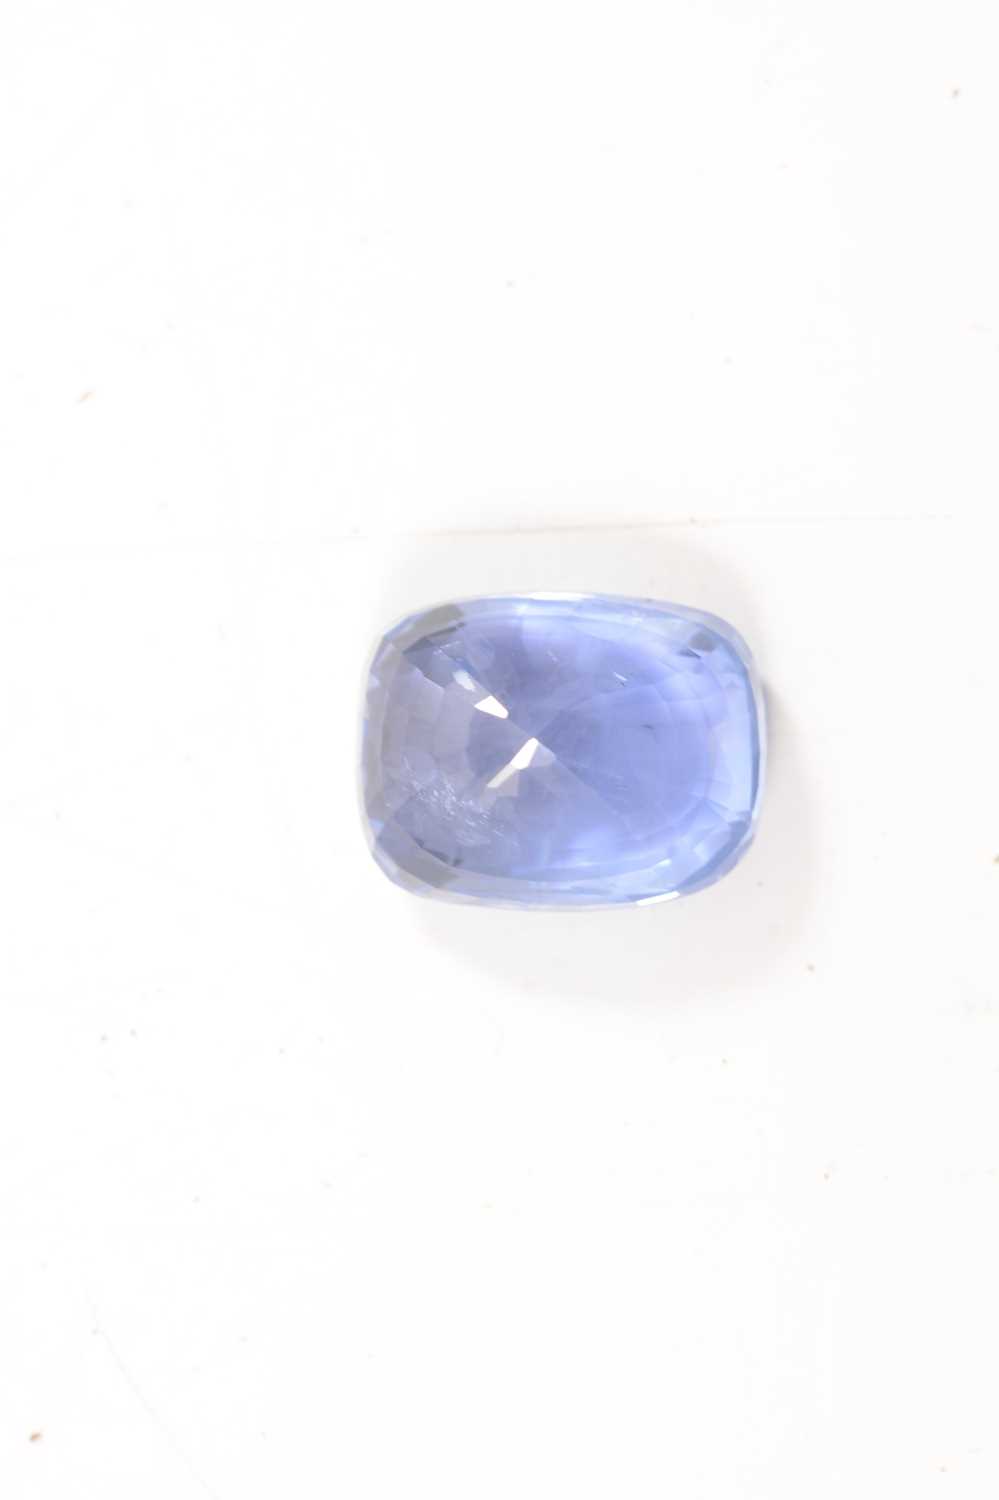 A loose blue sapphire stone - 12.25 carats. - Image 2 of 8